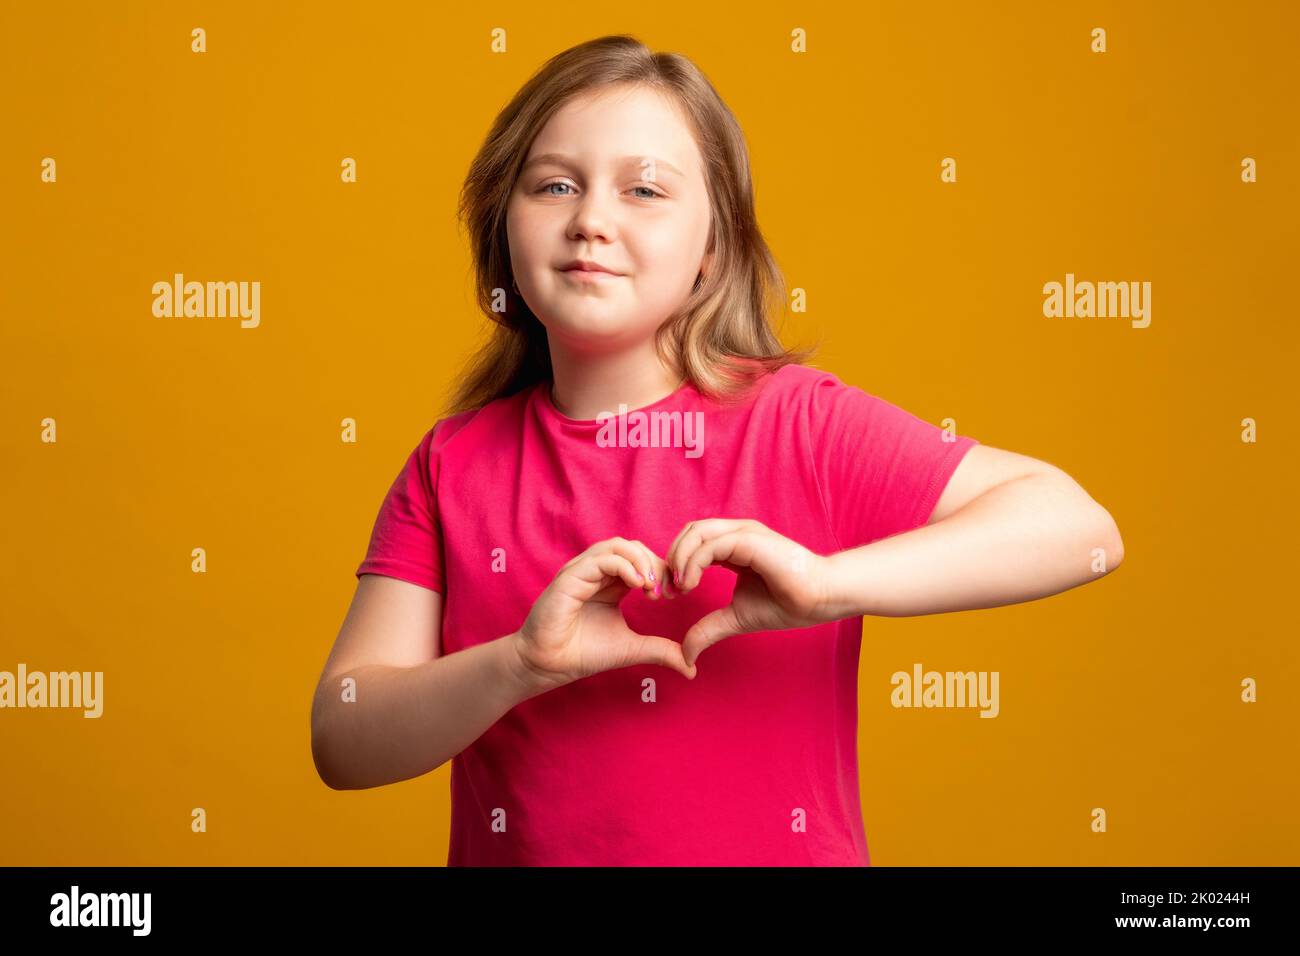 love sign supportive kid admiration sympathy girl Stock Photo